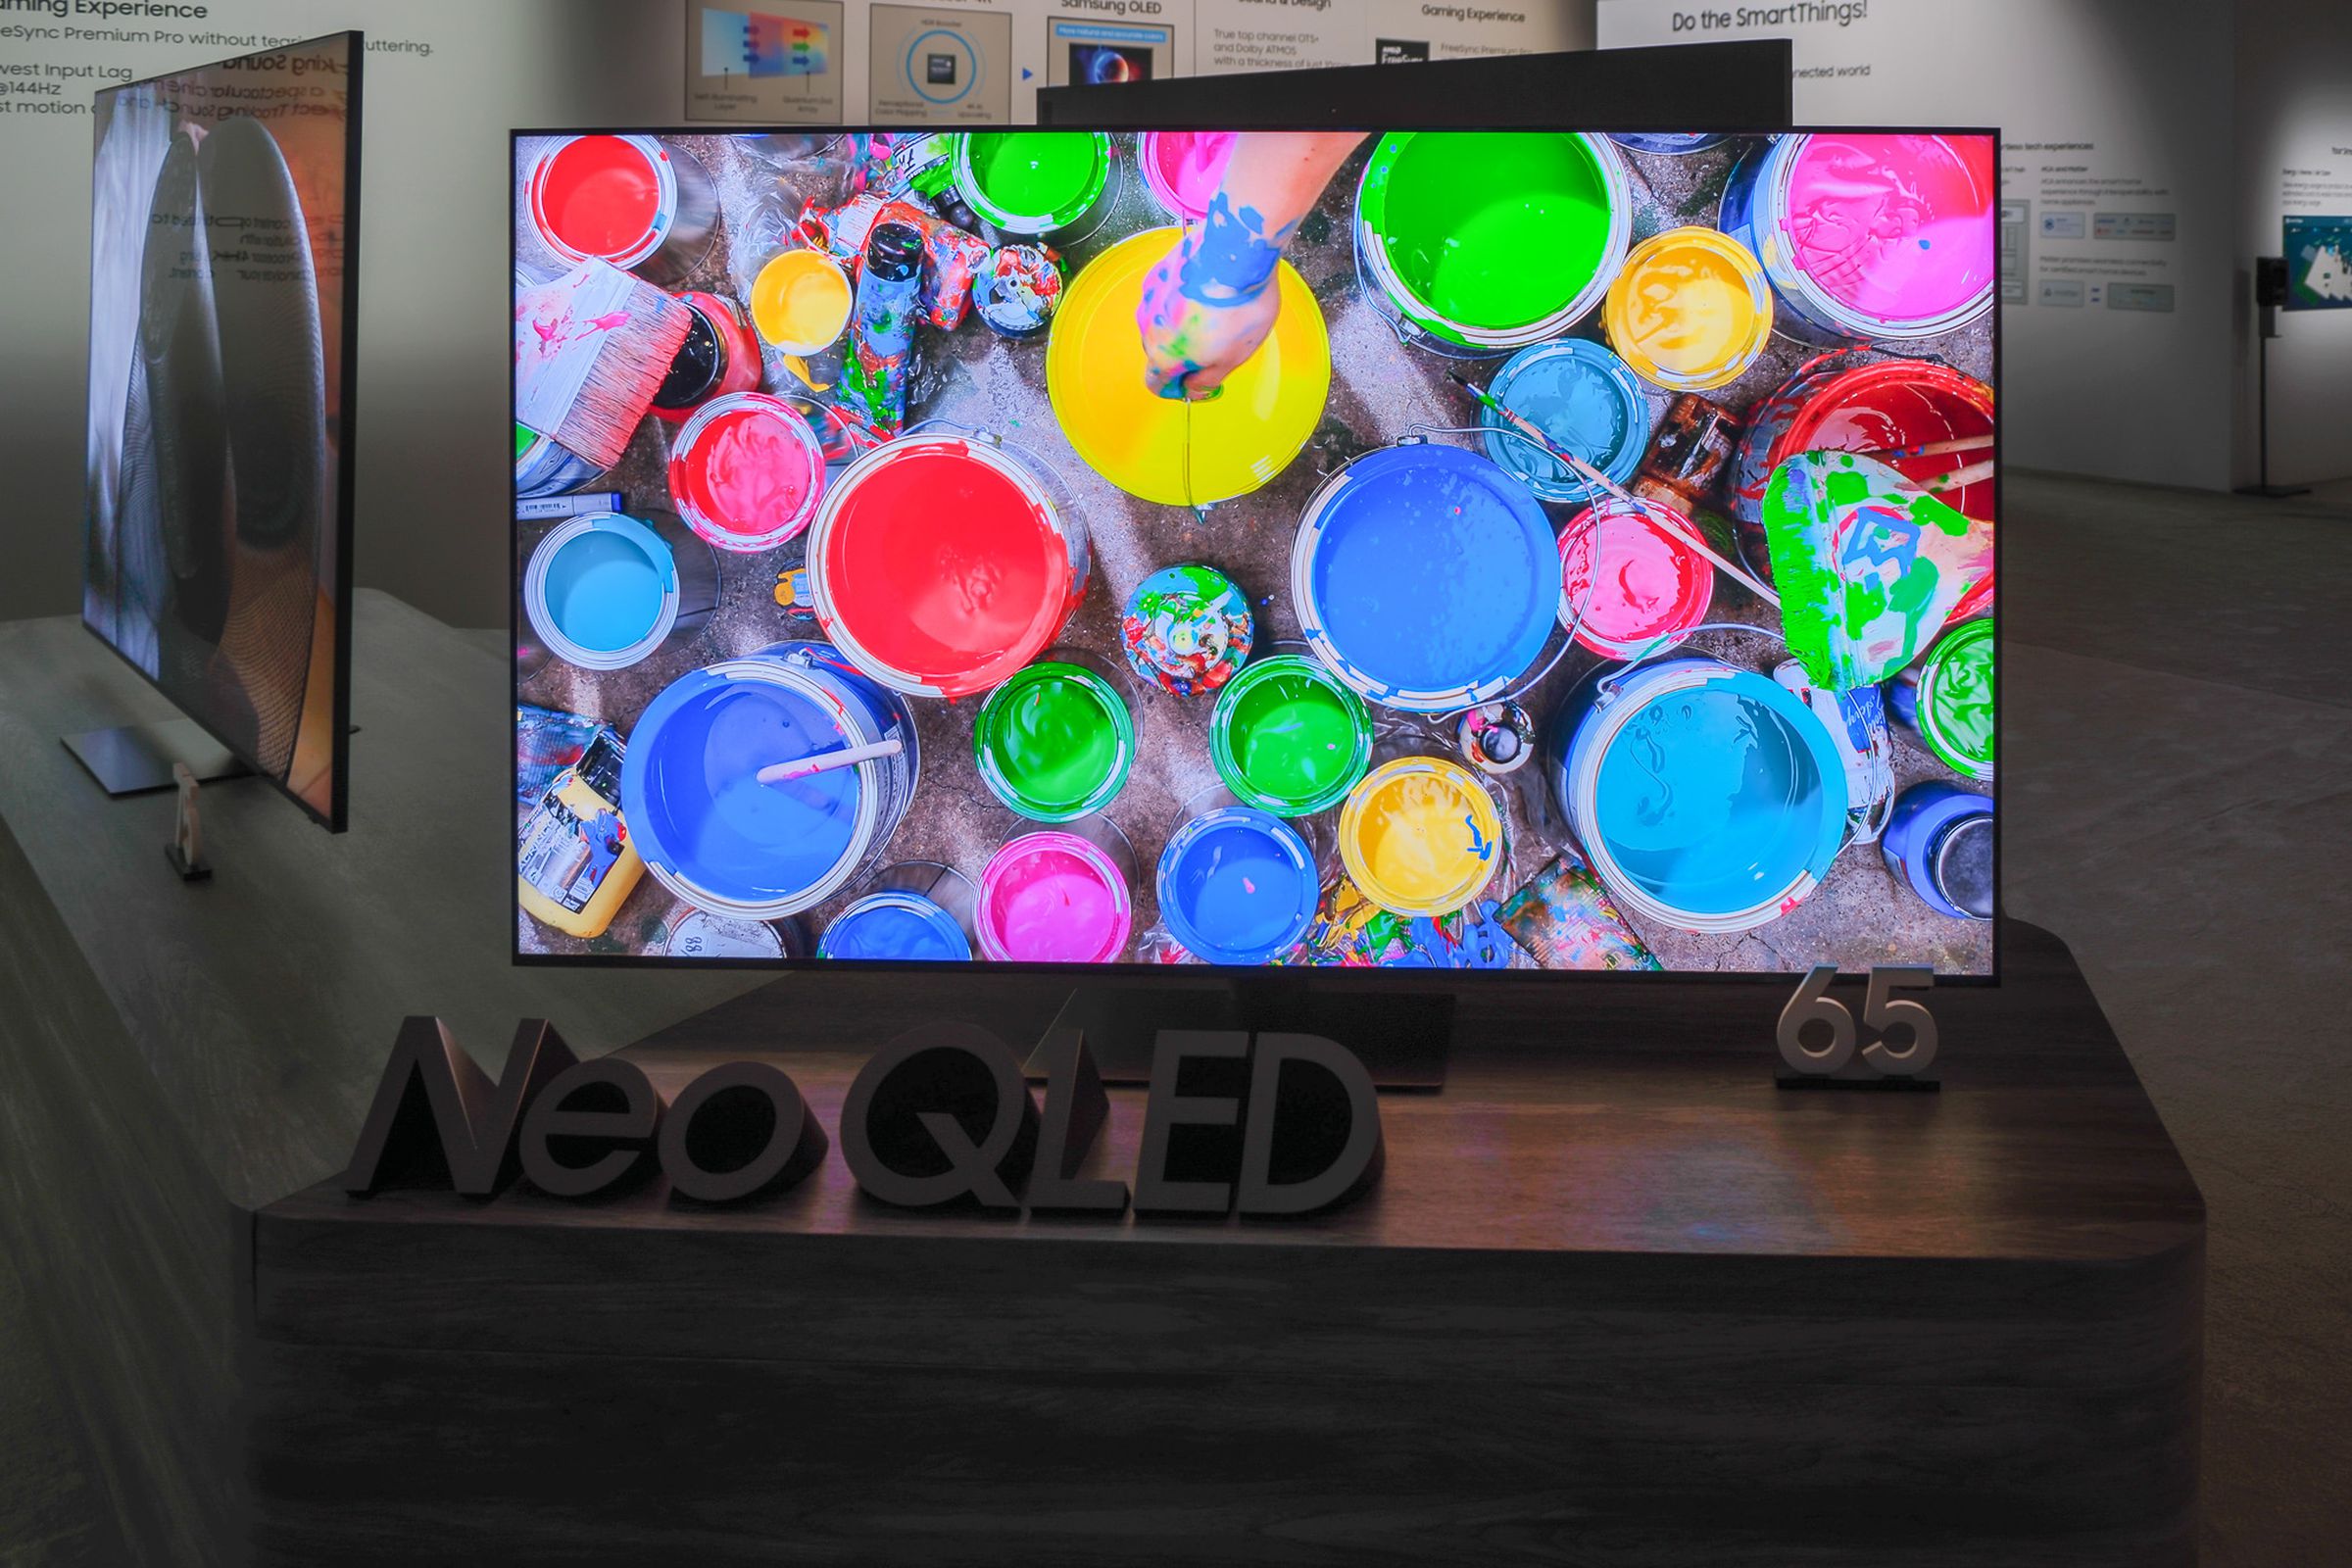 A photo of Samsung’s 2023 Neo QLED TV at CES 2023.